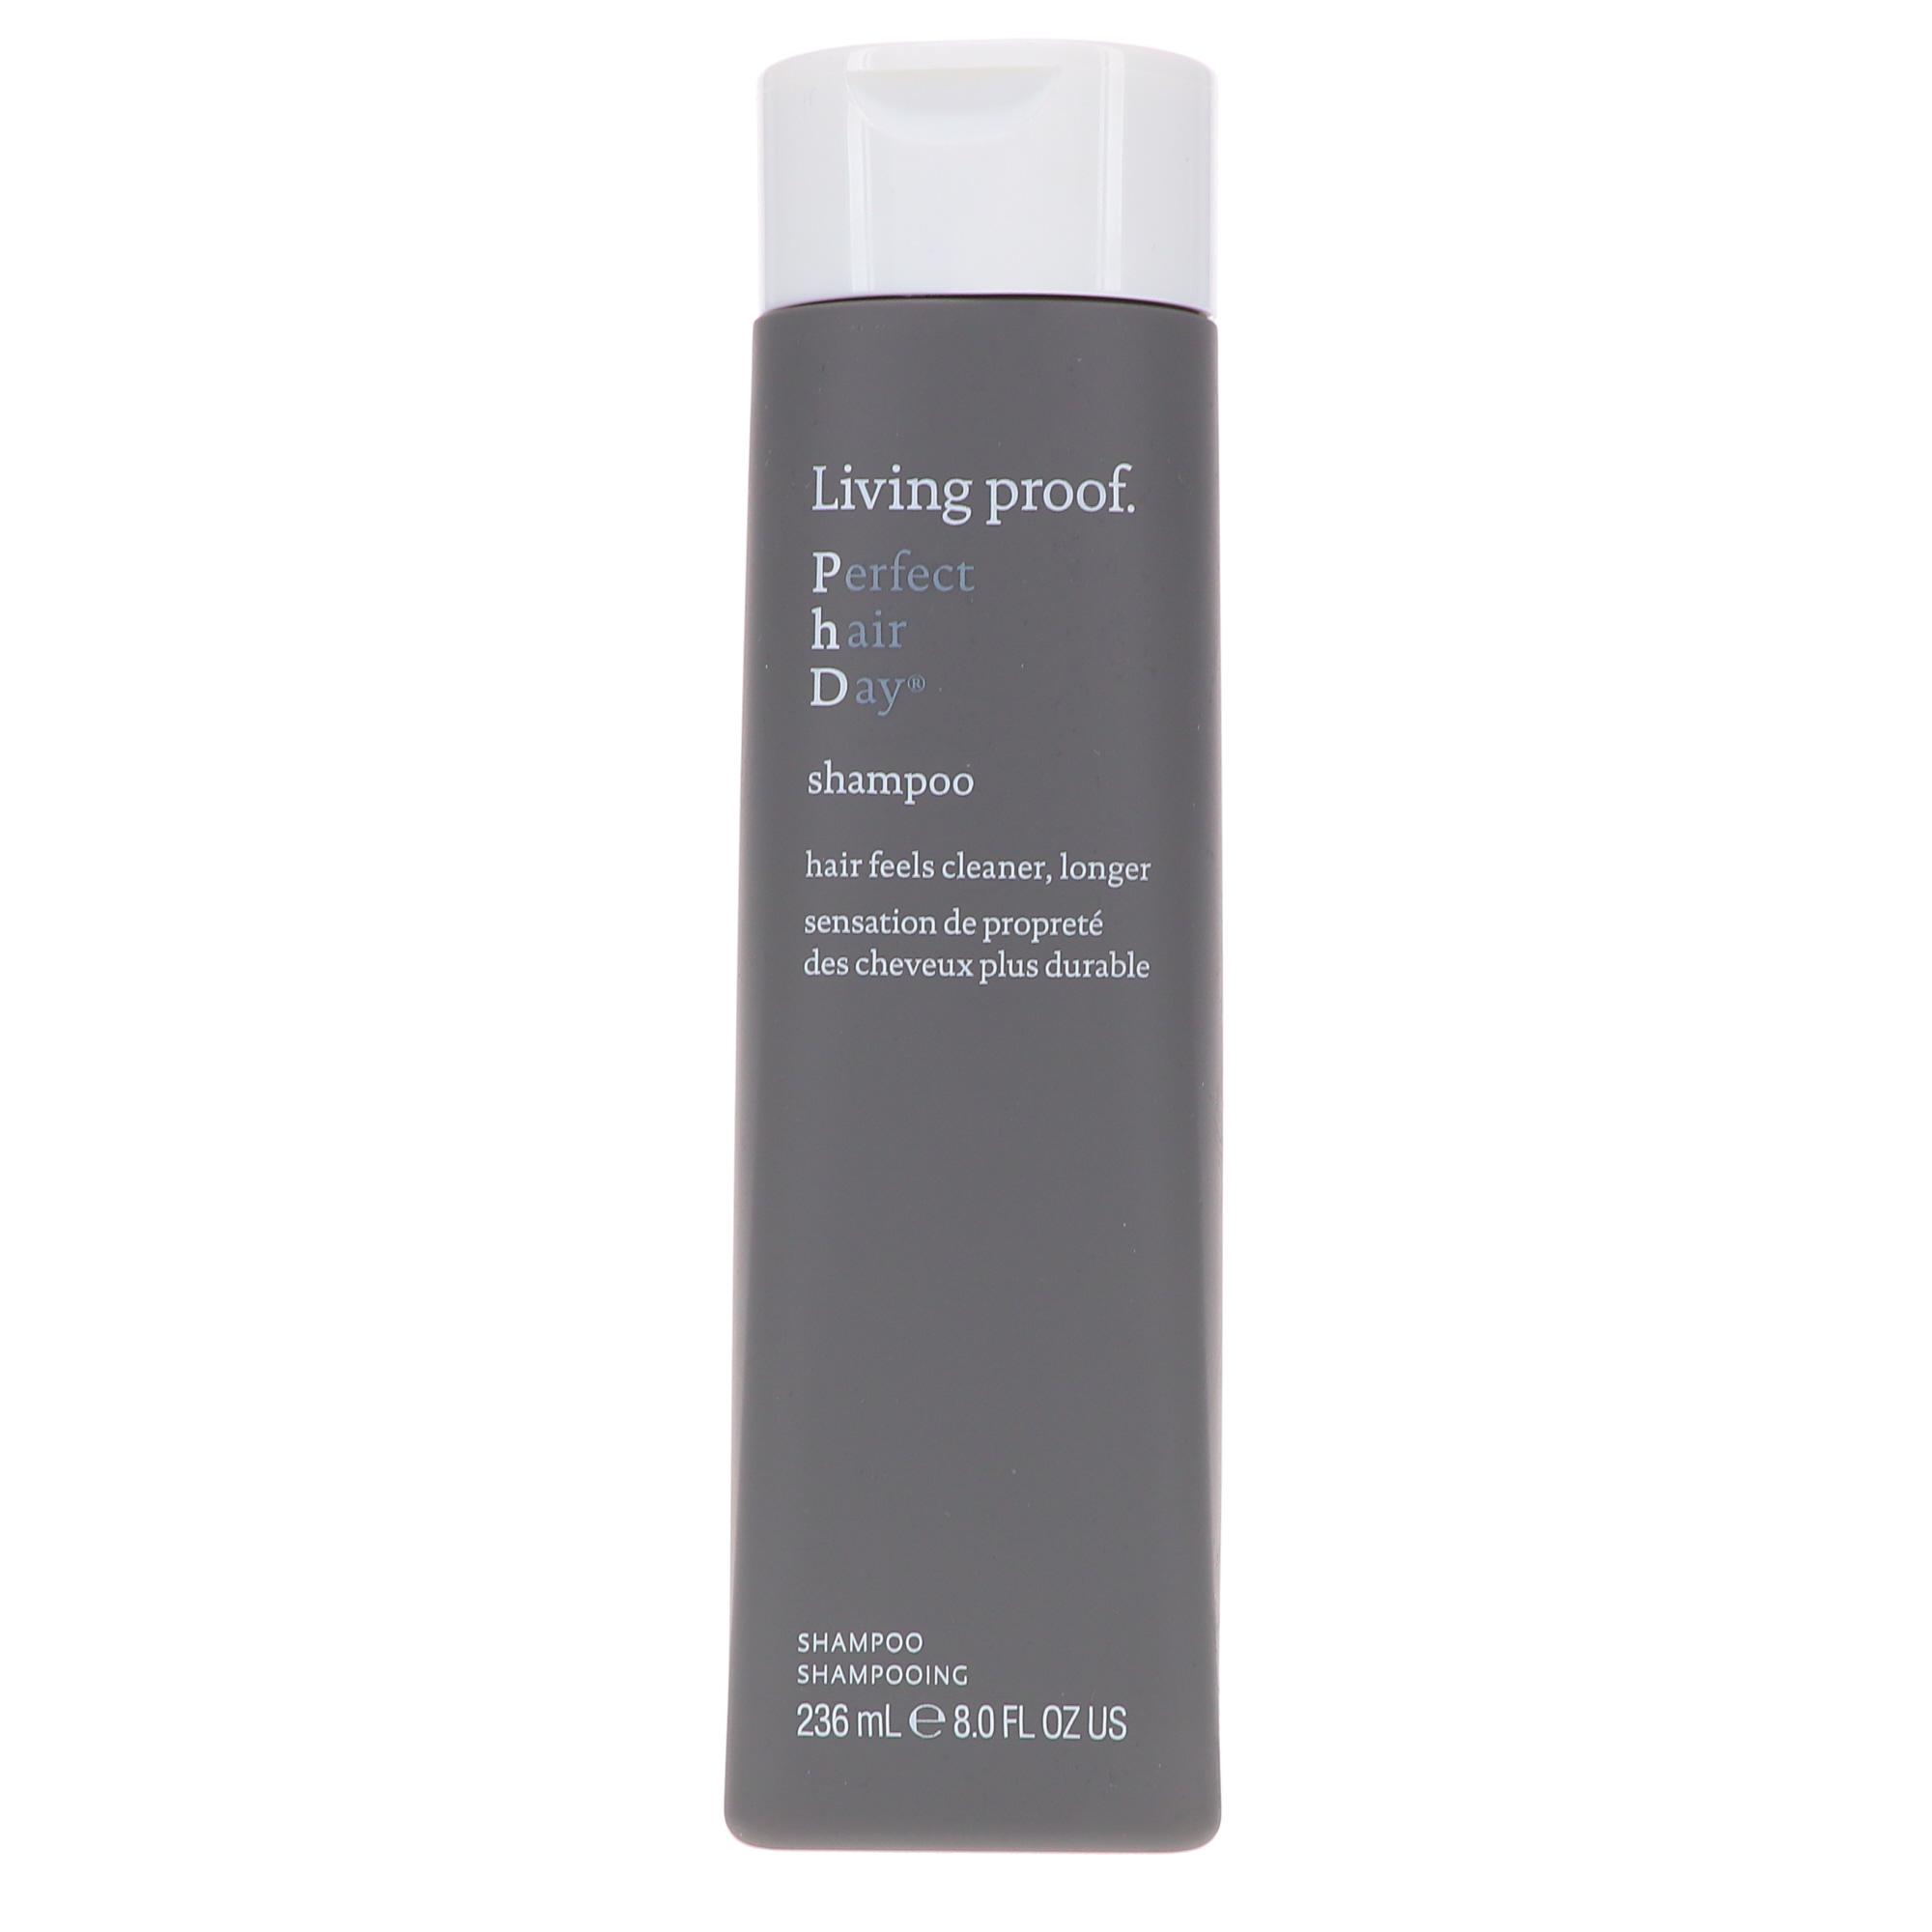 Living Proof Perfect Hair Day Shampoo 8 oz - image 1 of 8